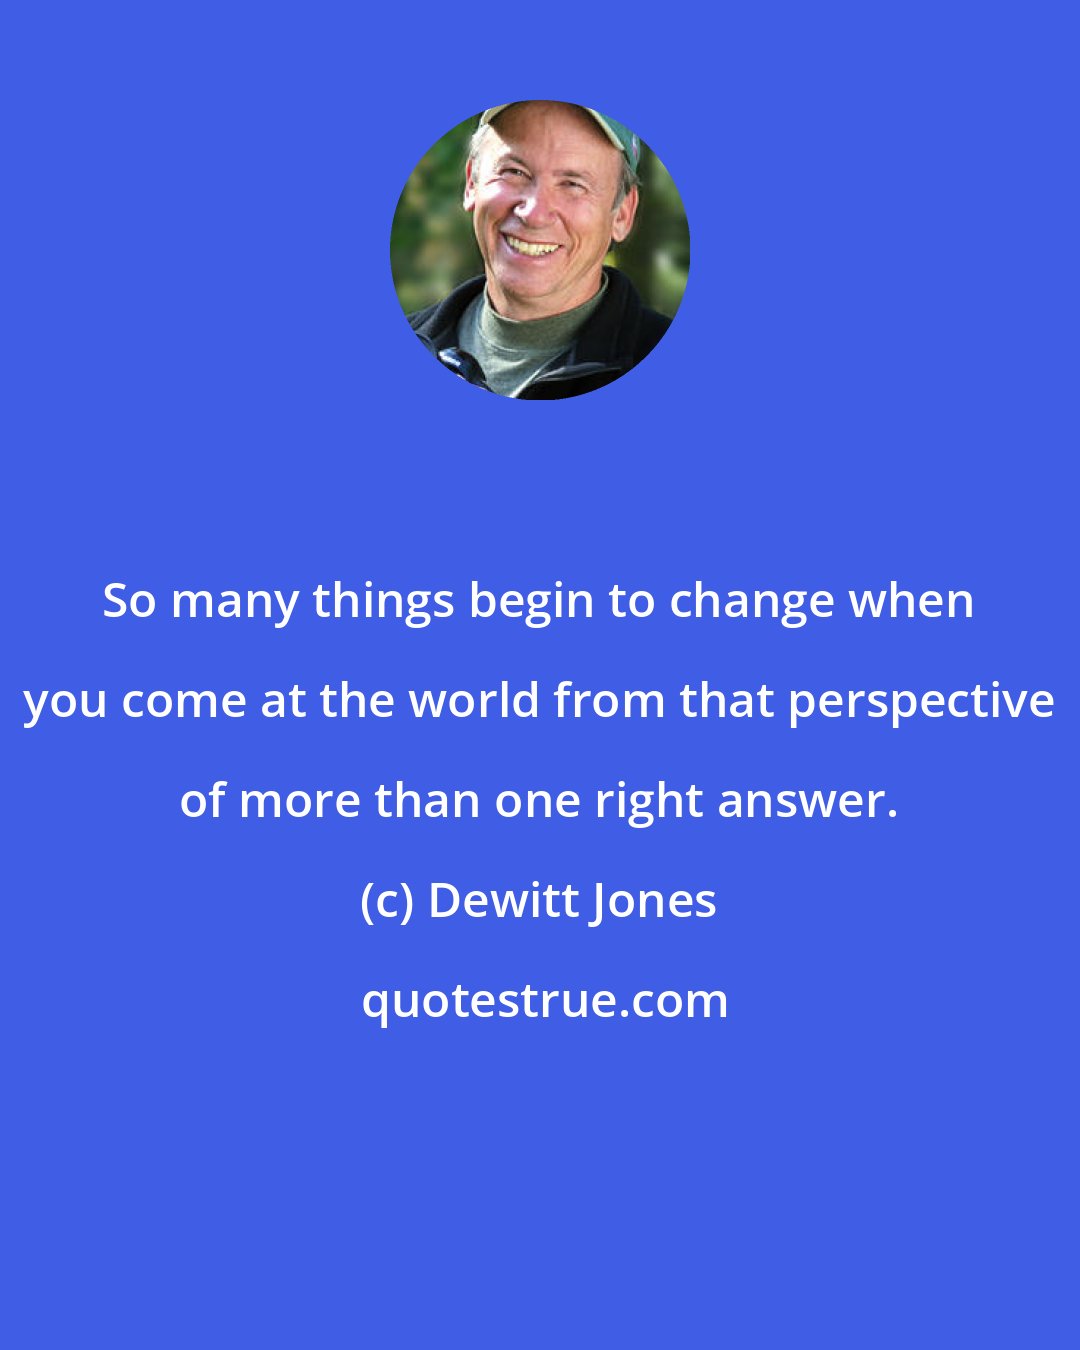 Dewitt Jones: So many things begin to change when you come at the world from that perspective of more than one right answer.